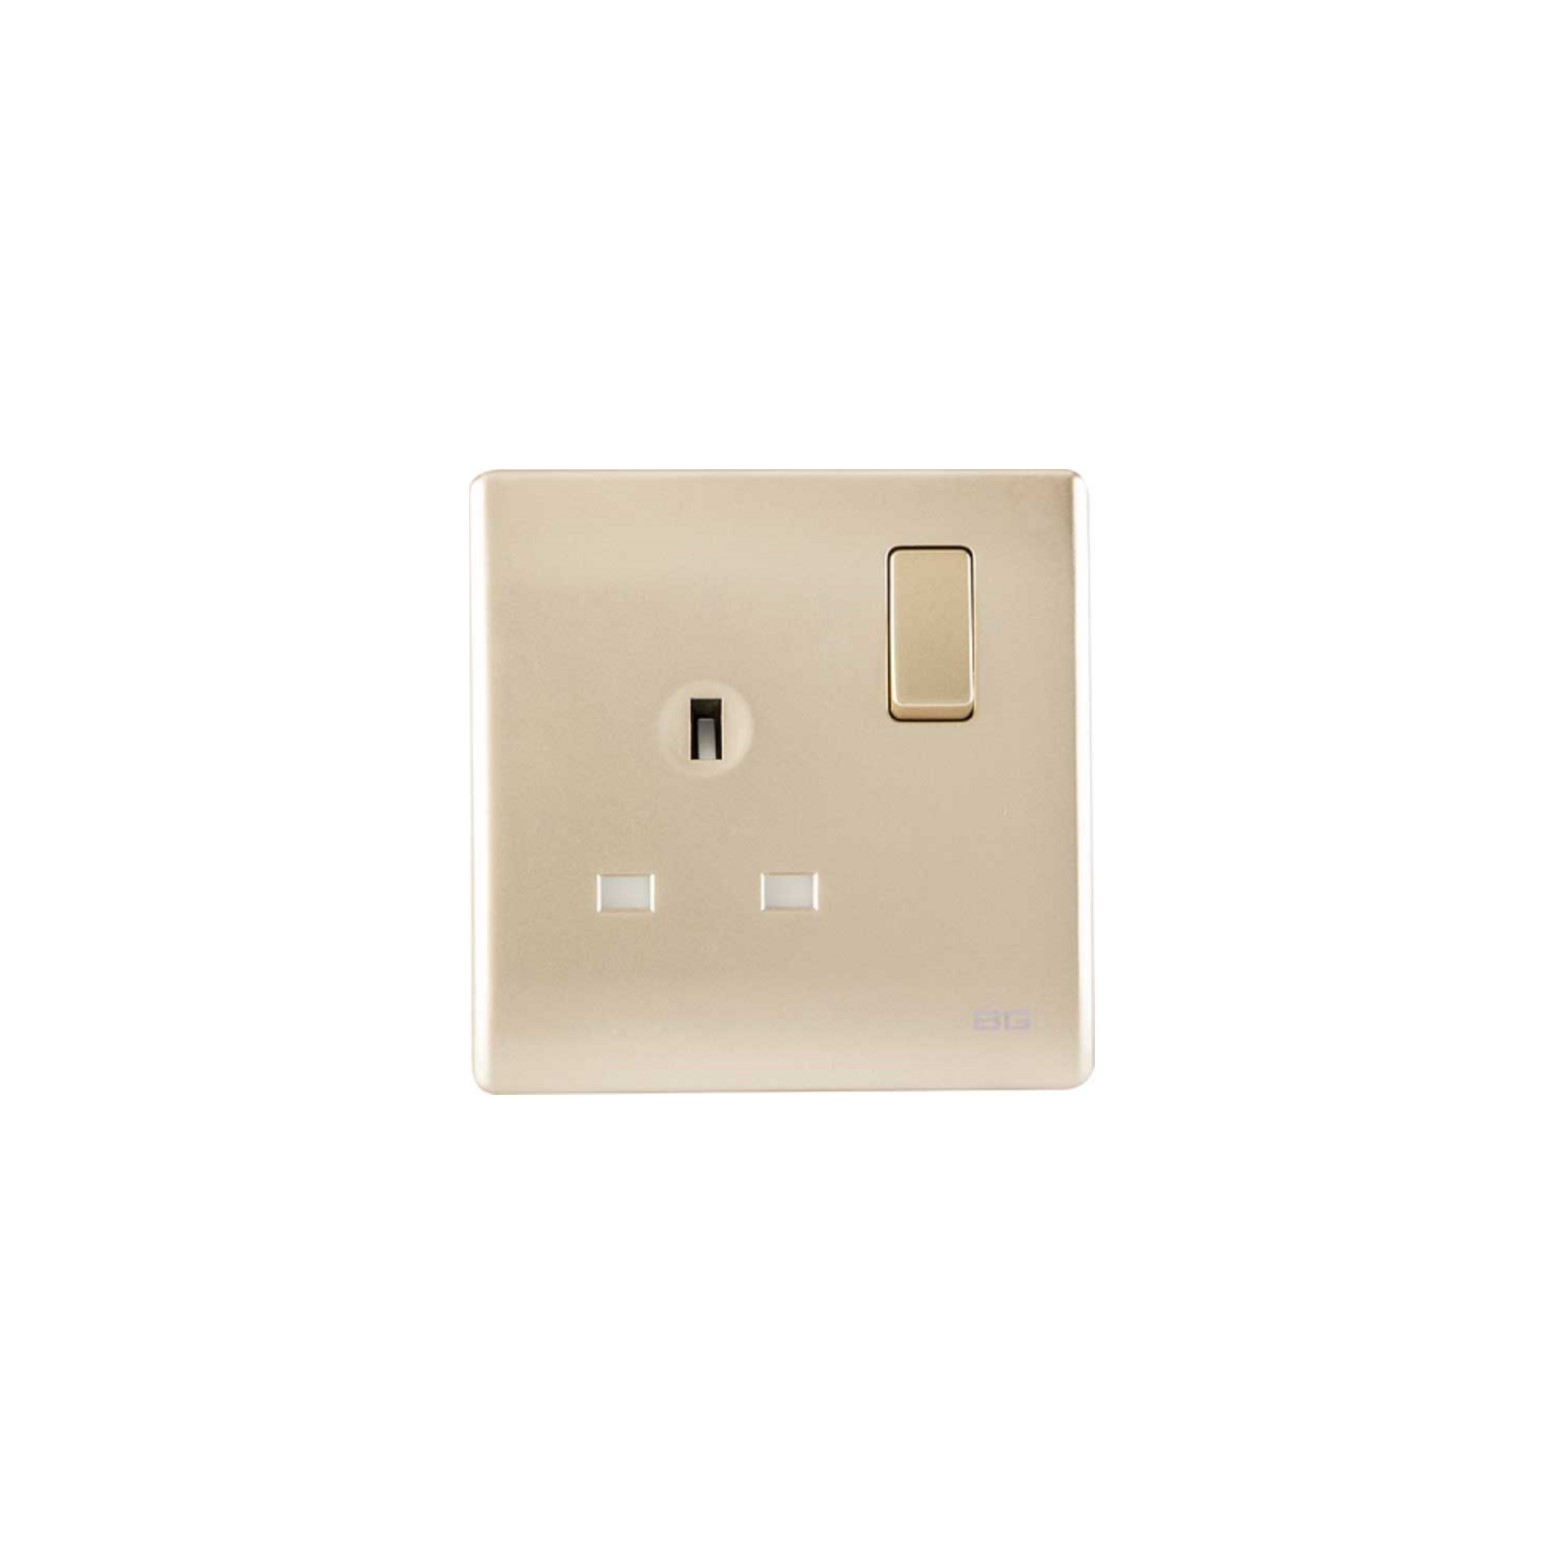 Champagne SlimLine 1-Gang 13A Switched Socket Outlet, 86 type wall socket BS/UK EMSD(PCCH21)